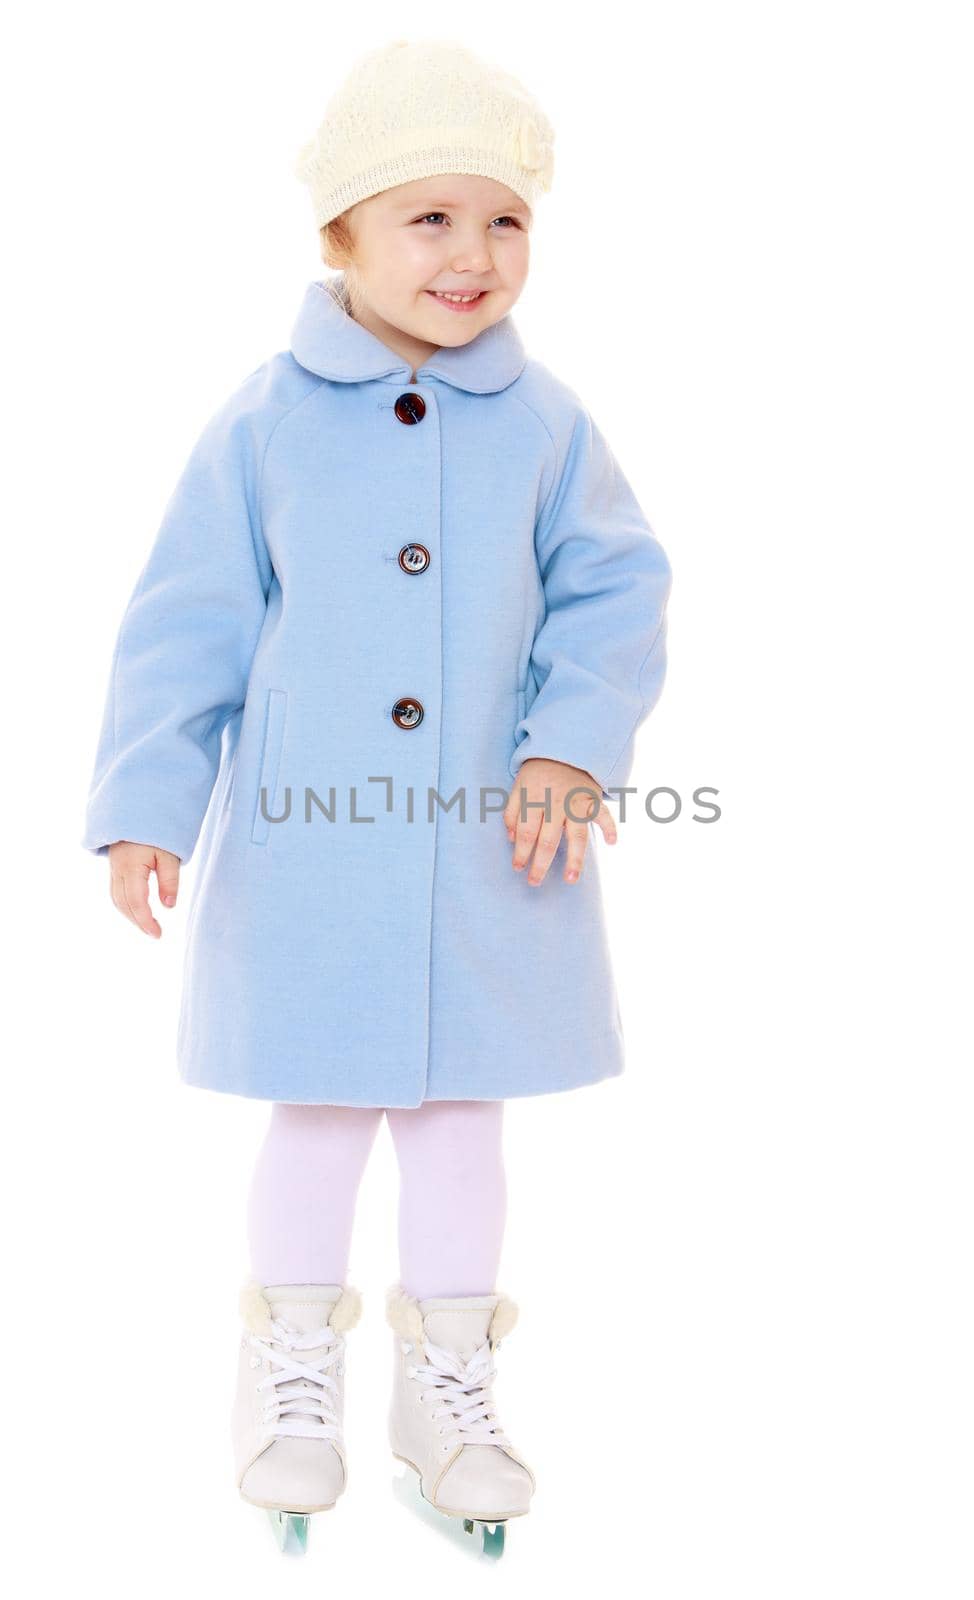 Cute little girl figure skater in a blue coat and a white cap is standing on skates with two blades-Isolated on white background